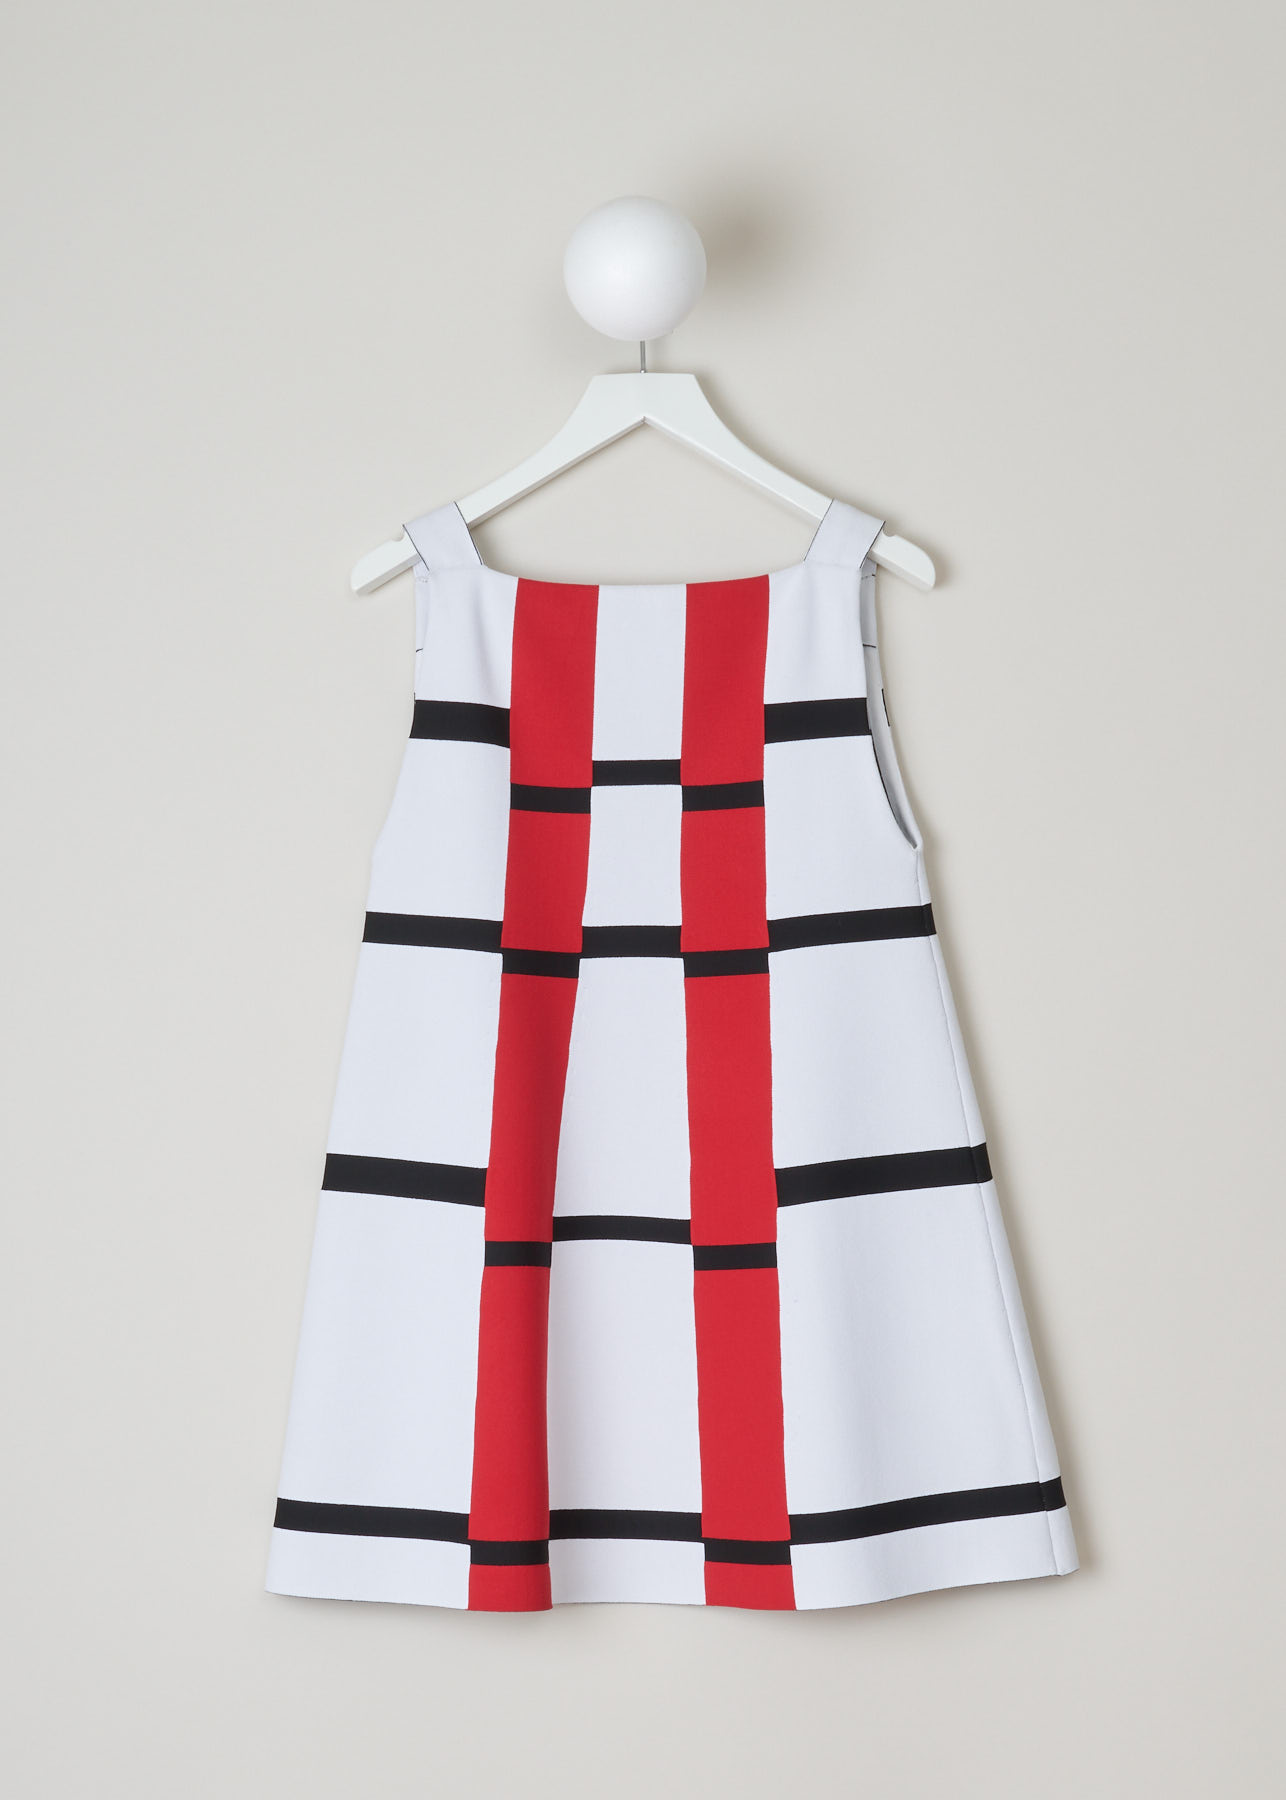 ALAÏA, GEOMETRIC A-LINE TUNIC, 7E9UE24LM327_tunique_sm_mirage_CM00_multico00, Print, White, Red, Back, Knitted A-line tunic in sixties style. The dress is made with a graphic patterned fabric in white, red and black. This model has an elegant, straight neckline, is a slip-on without zip and buttons and come in right under the knee.
